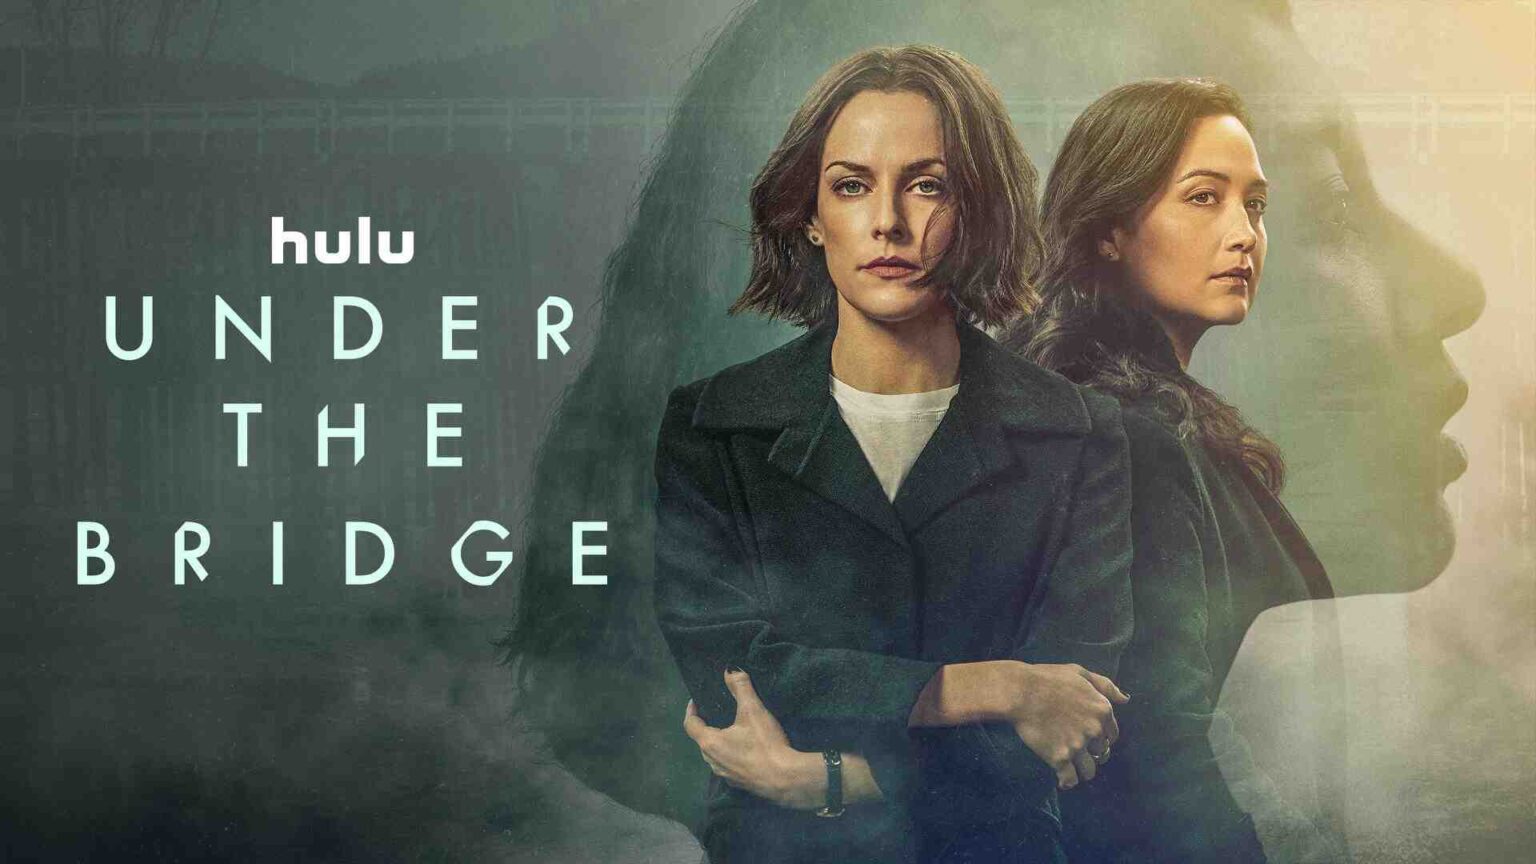 "Hulu's 'Under the Bridge' meticulously blurs fact and fiction. What's real in this chilling portrayal of the Reena Virk case? Feed your true crime hunger, unmask the reality here."